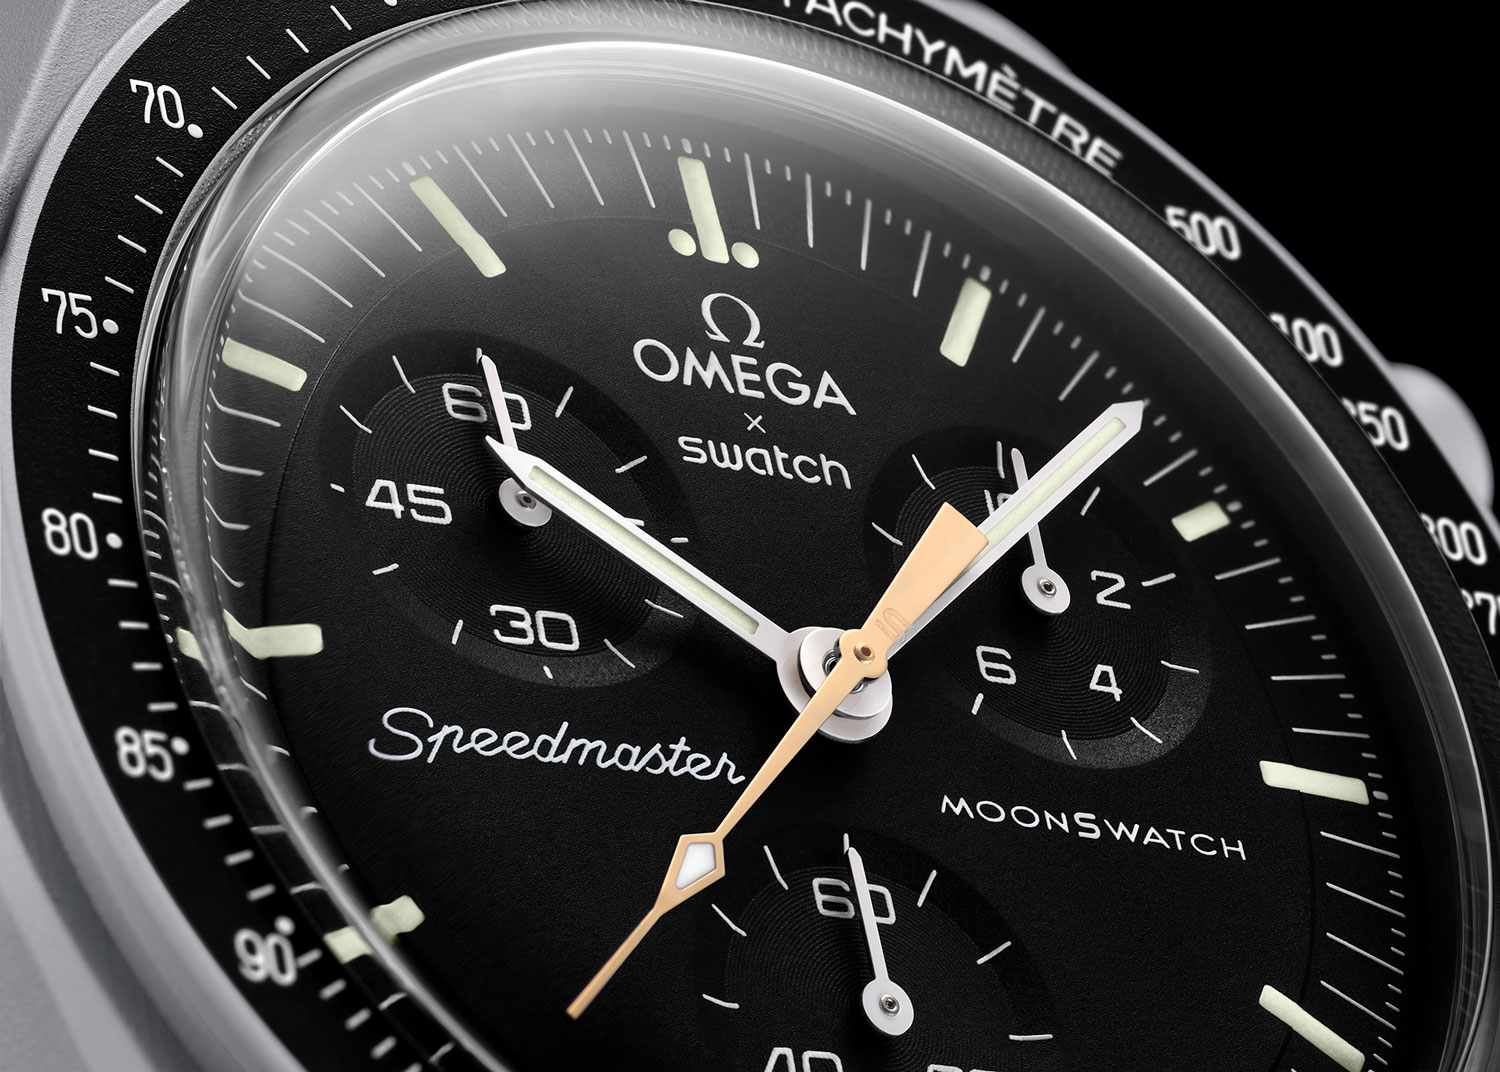 Omega X Swatch MoonSwatch Mission to Moonshine Gold Detalle esfera